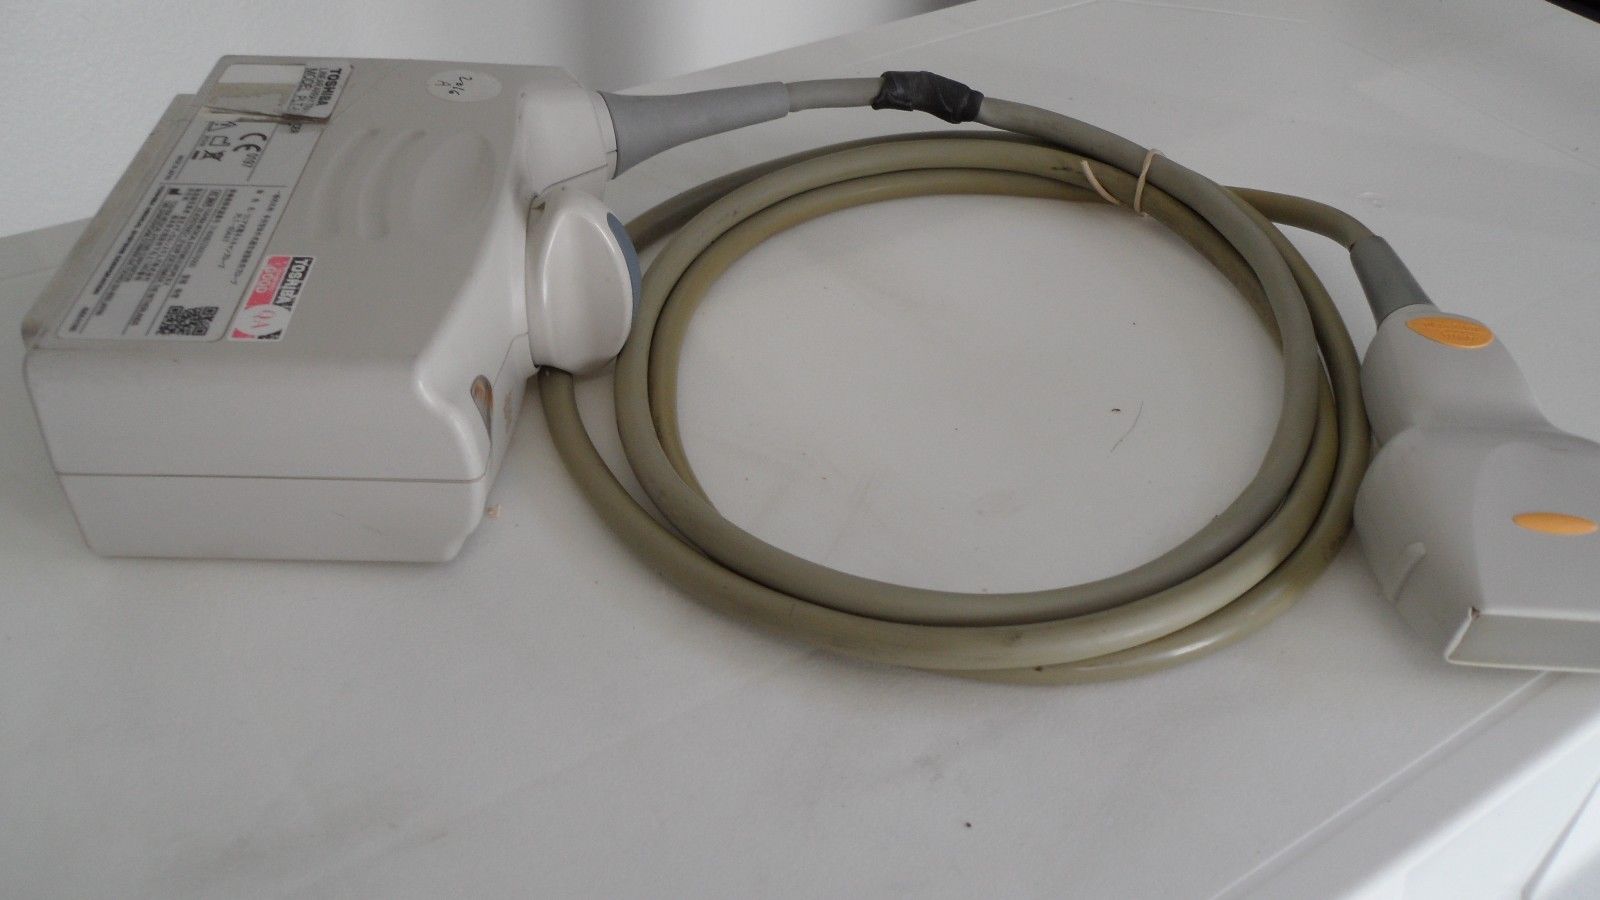 Toshiba  PLT-604AT 6MHz Linear Array Ultrasound Transducer Probe DIAGNOSTIC ULTRASOUND MACHINES FOR SALE